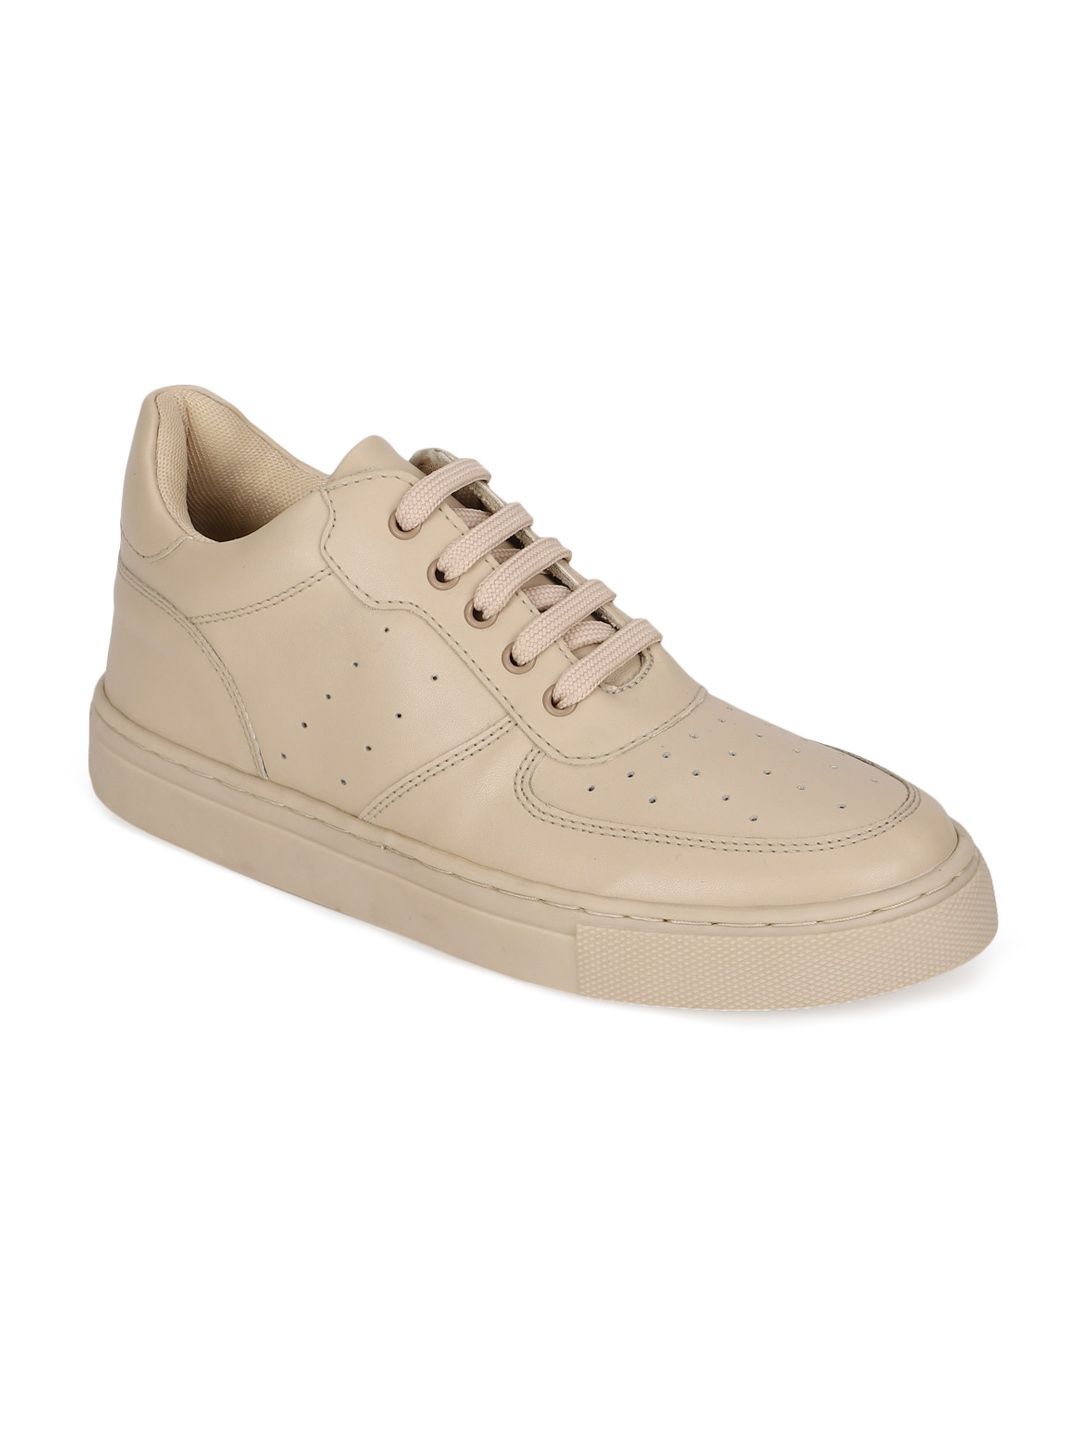 Truffle Collection Women Cream-Coloured Perforations PU Sneakers Price in India